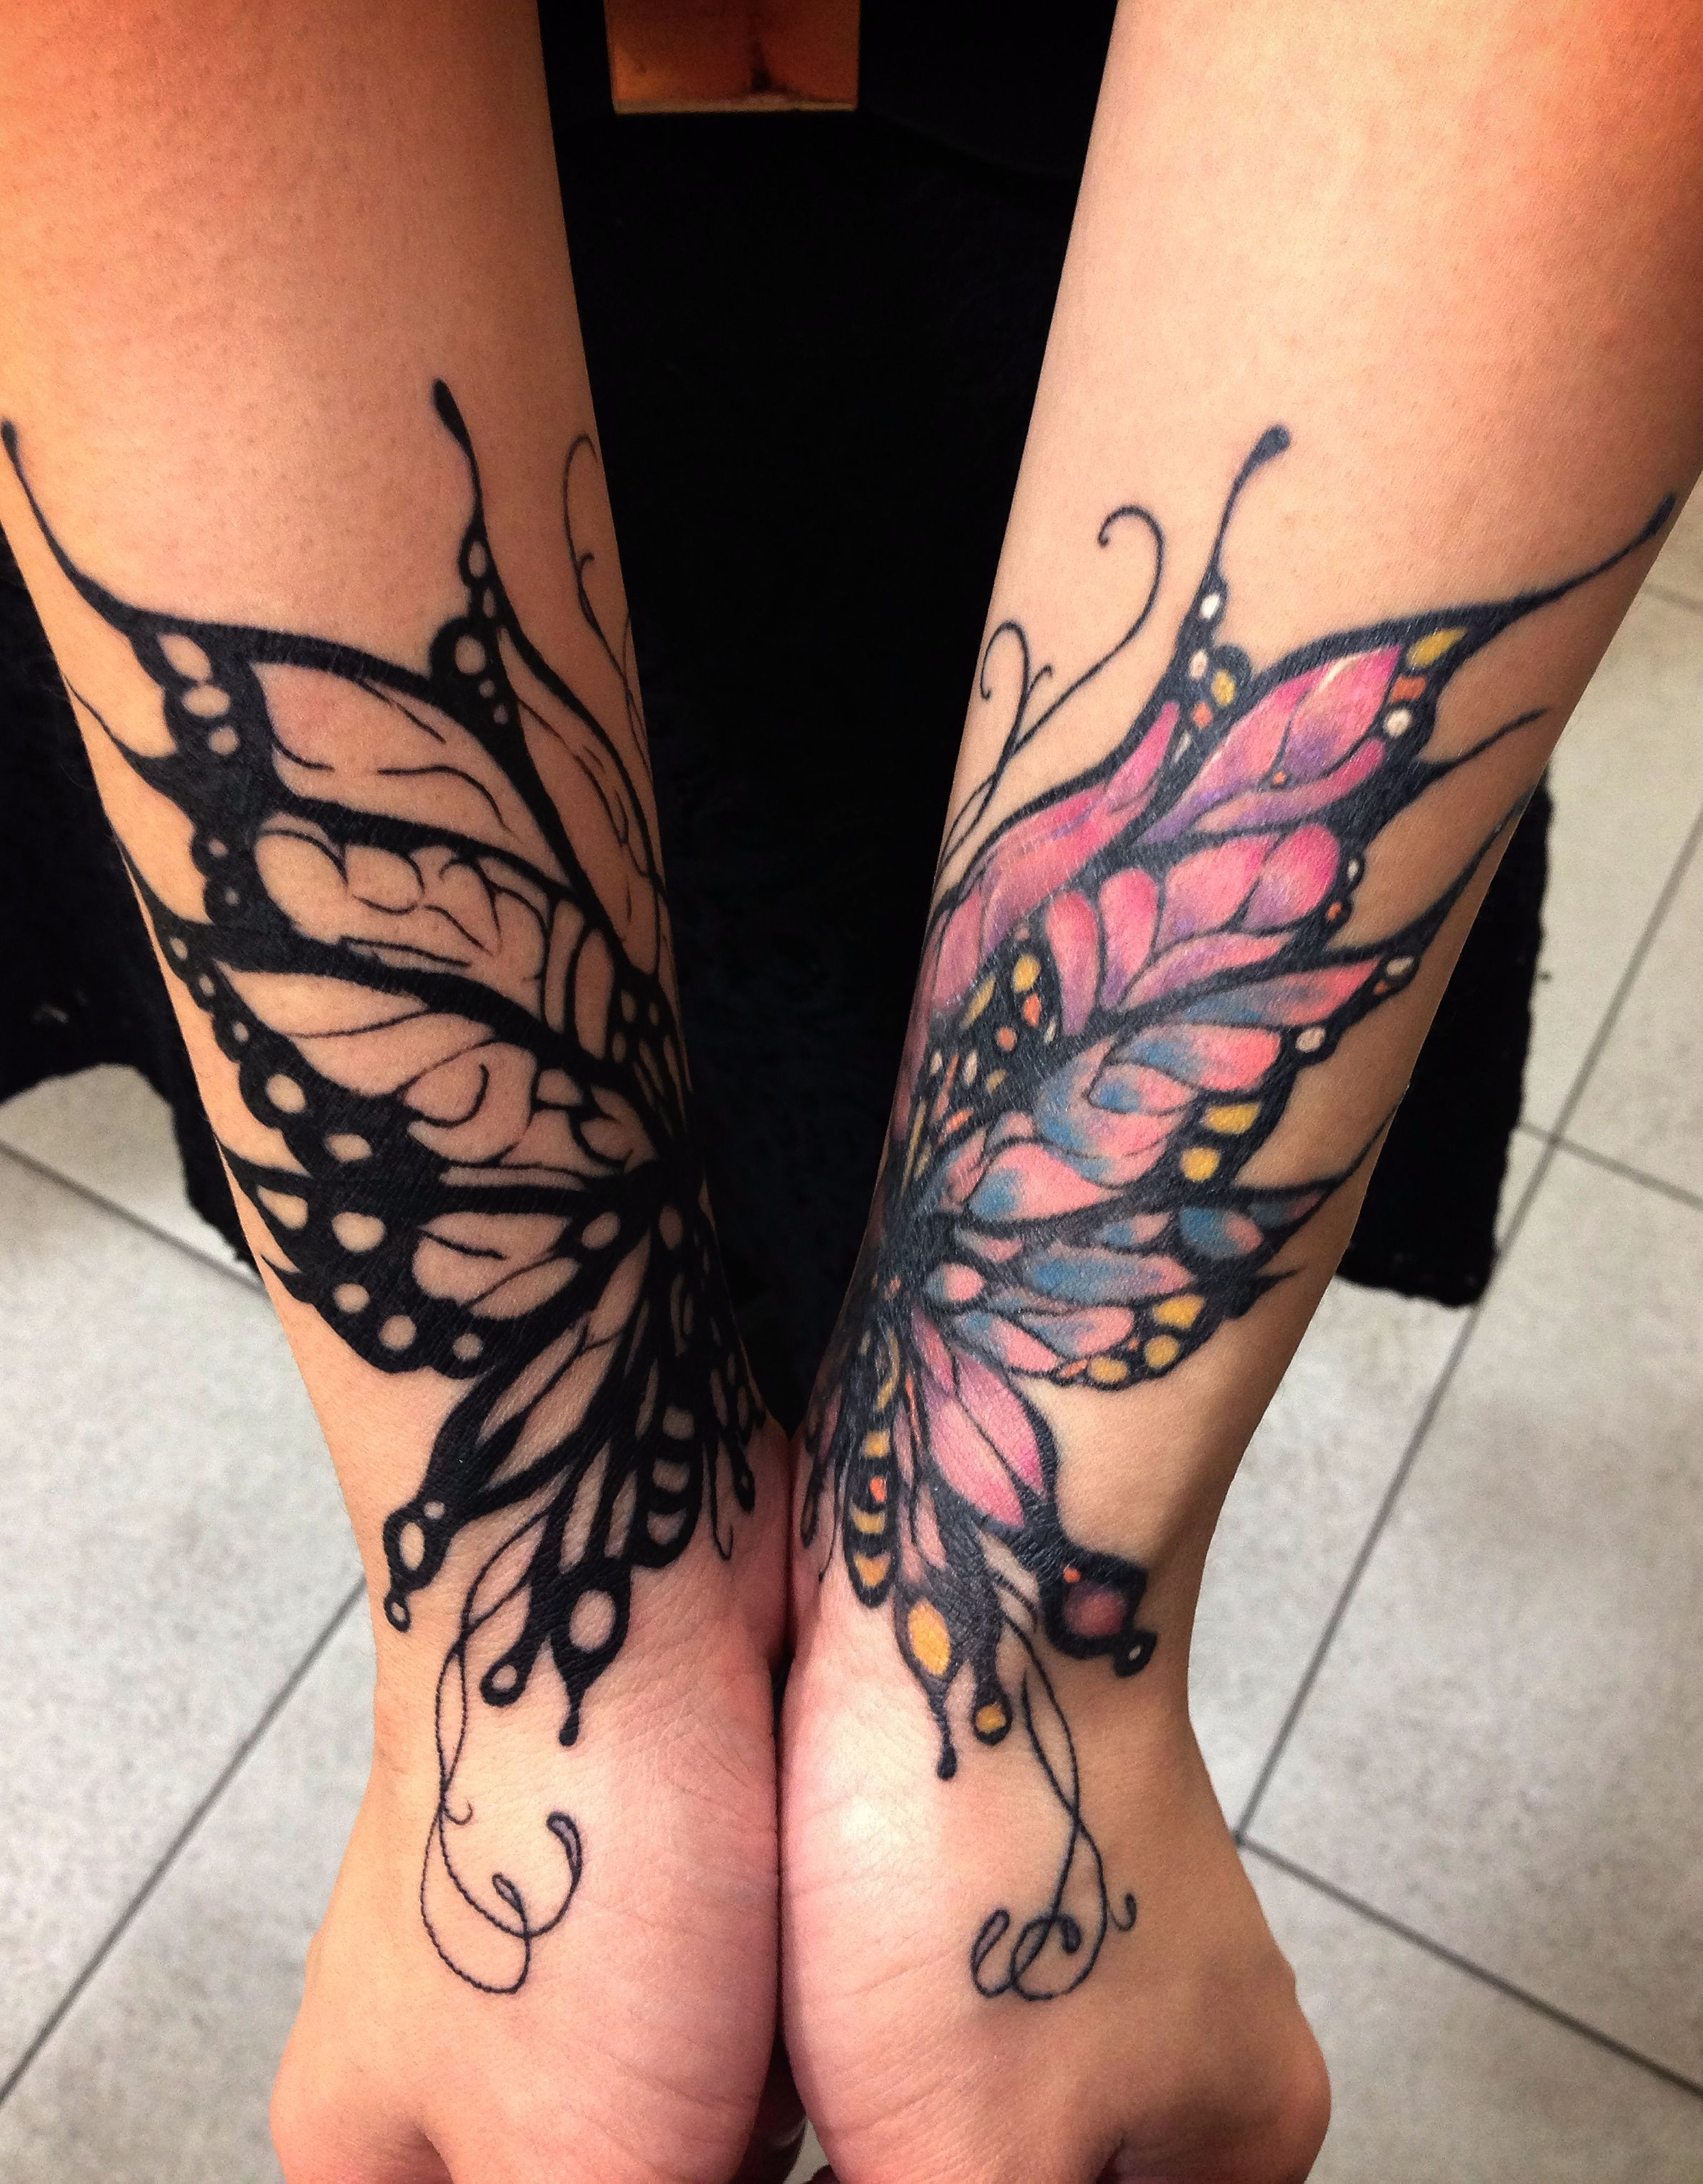 A Salesgirl Butterfly Fairy Tattoo That Im Loving Inspire Fairy within dimensions 2385 X 3059